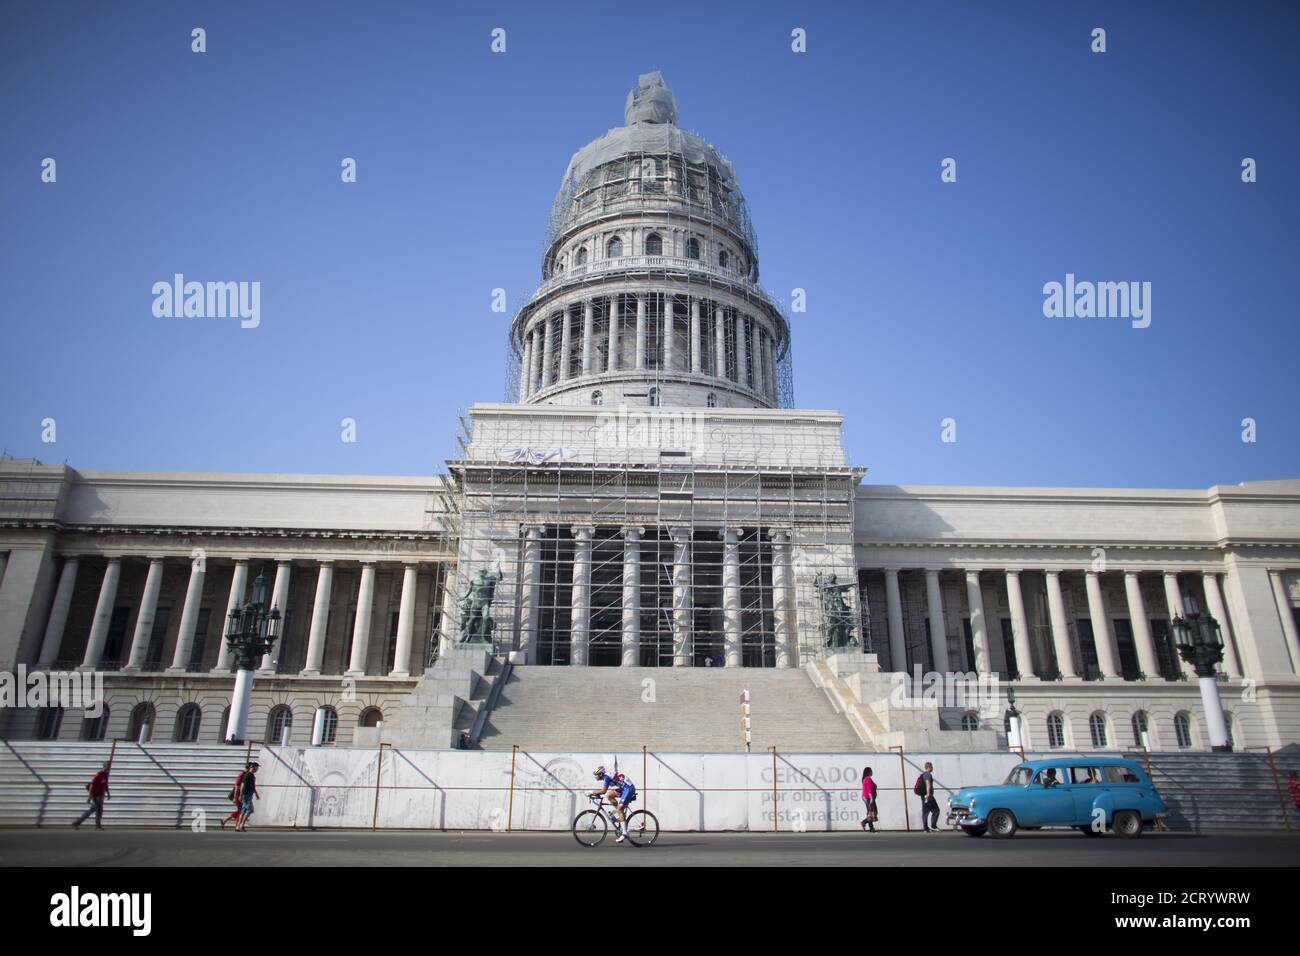 Austrian Cyclist Jacob Zurl, who will try to mark a world record of non stop riding of 1400 Km between Faro de Punta de Maisi on the East side of Cuba to Cabo de San Antonio on the West side of the island, rides for journalists in front of the Capitol in Havana, December 9, 2015. REUTERS/Alexandre Meneghini Stock Photo